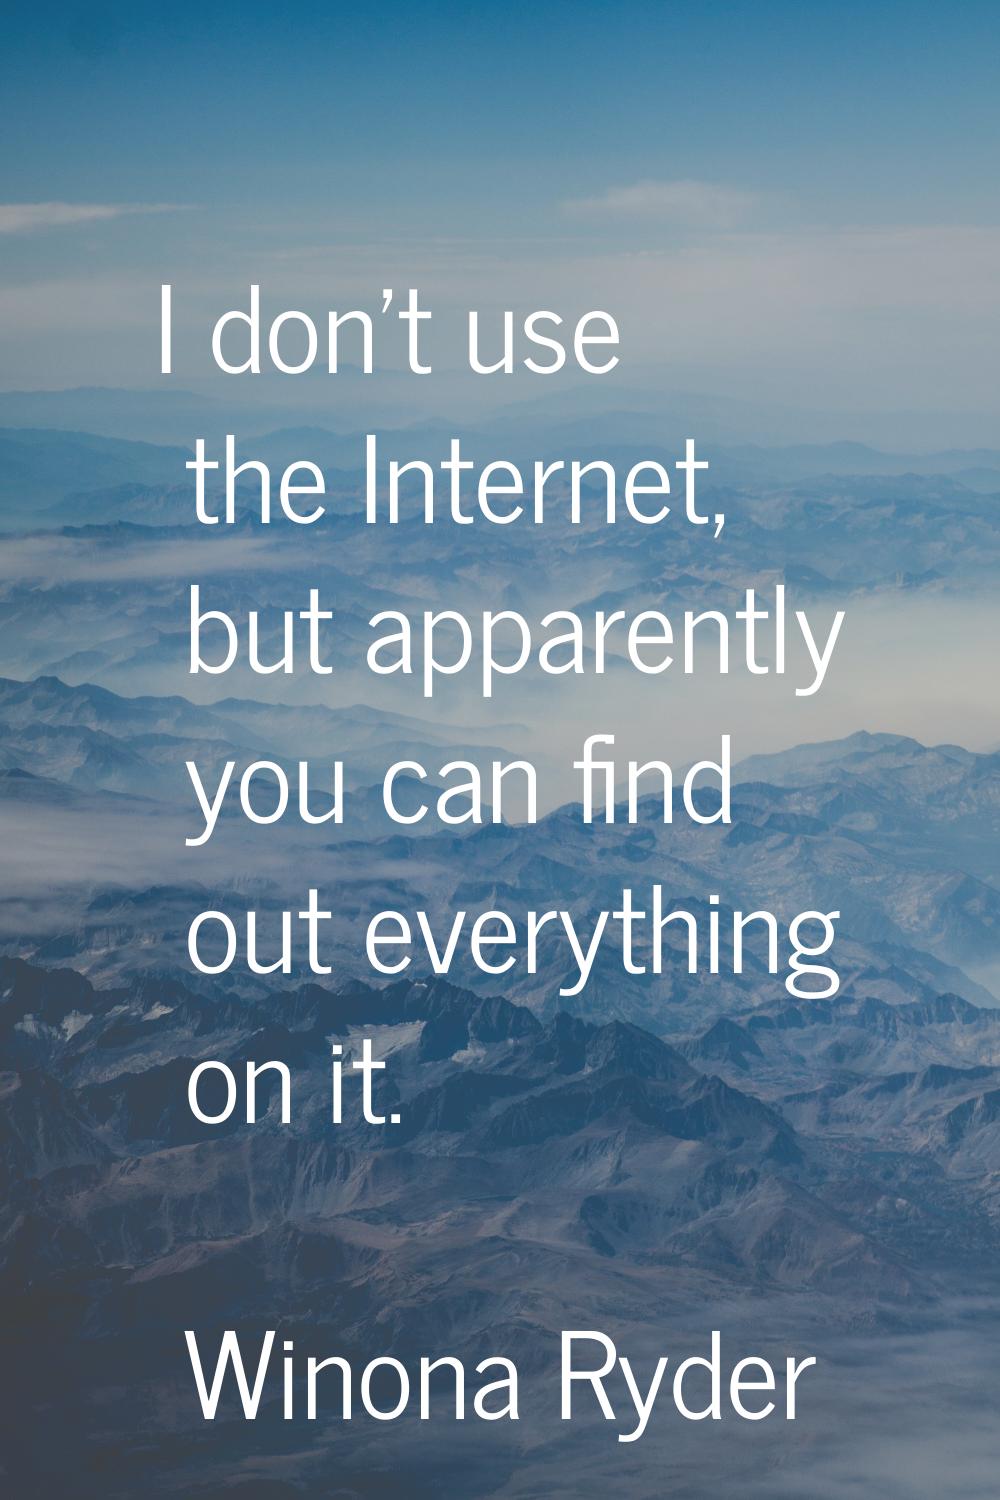 I don't use the Internet, but apparently you can find out everything on it.